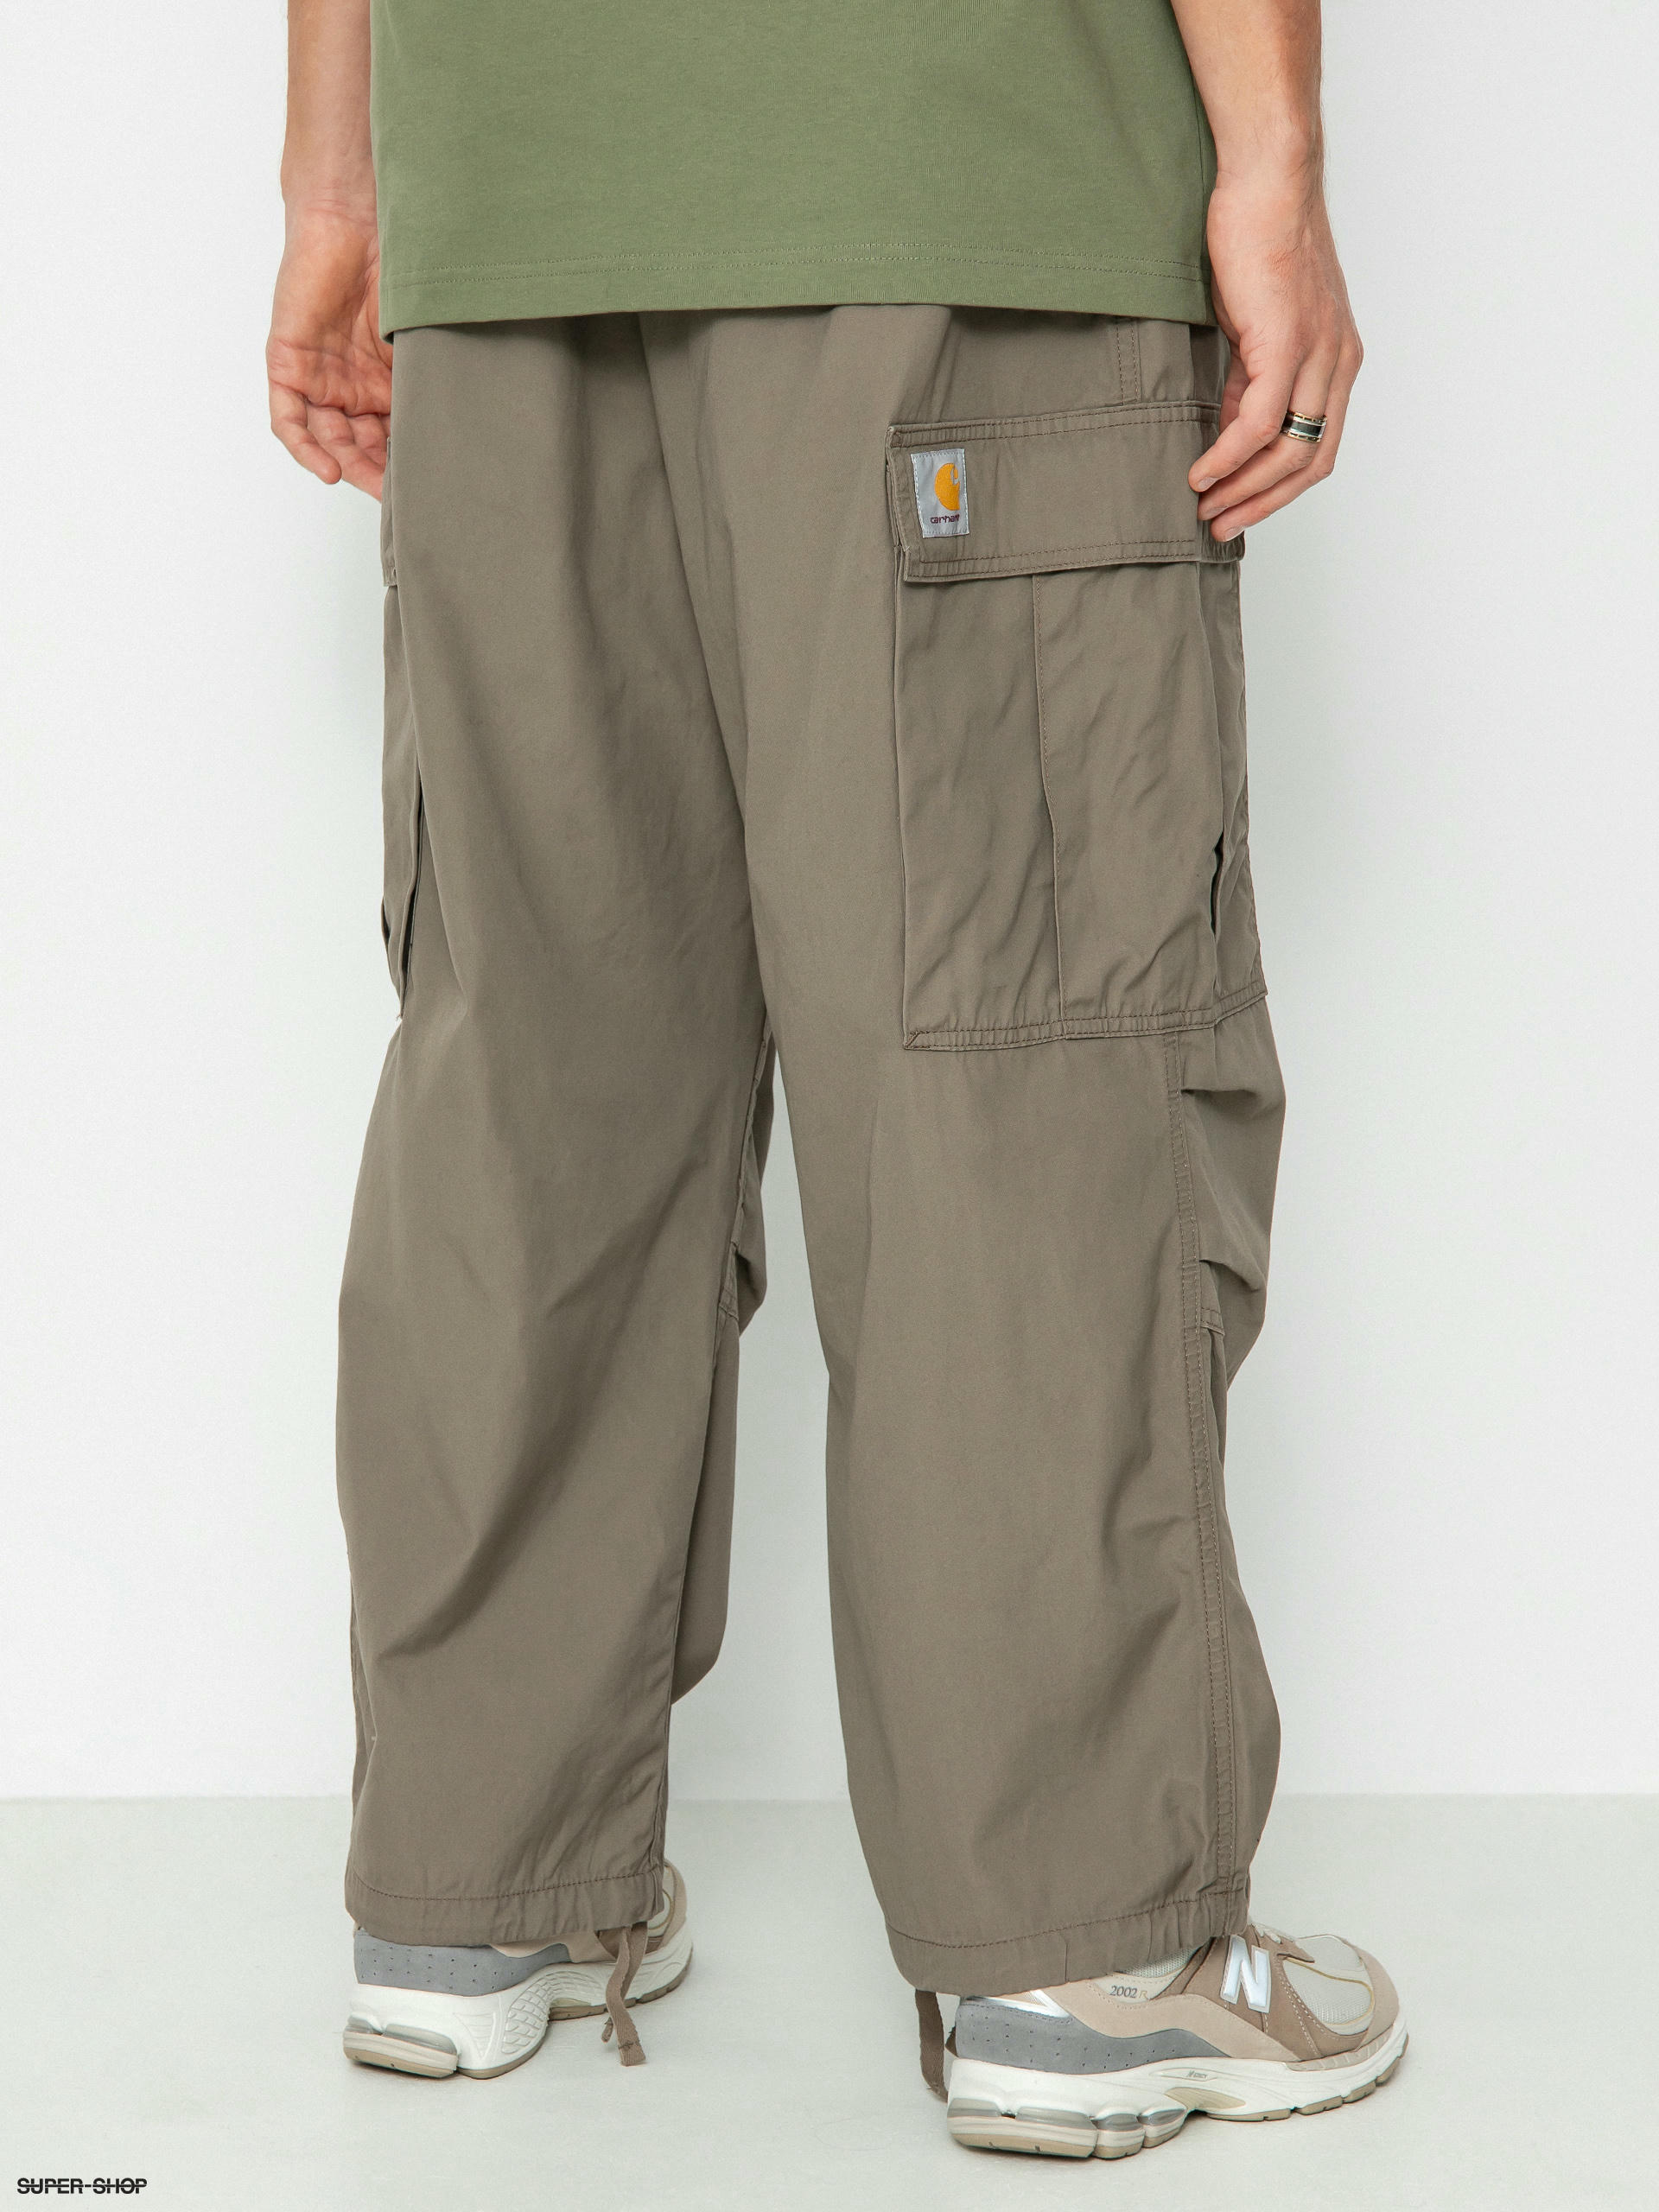 THE BEST CARGO PANTS EVER - carhartt wip, under 100$ or a hypebeast try-on/  tubavalon 